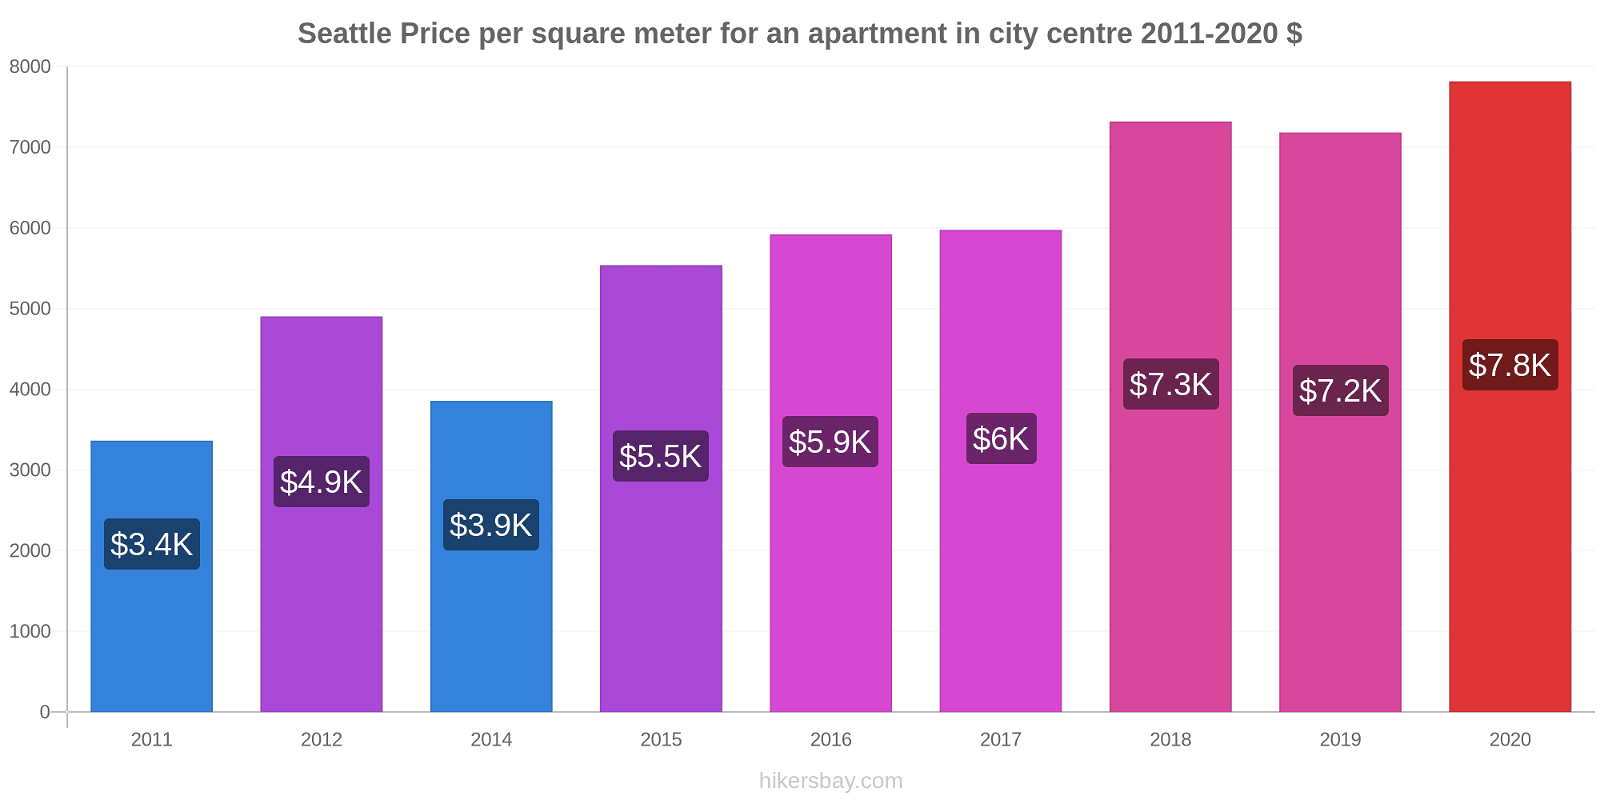 Seattle price changes Price per square meter for an apartment in city centre hikersbay.com